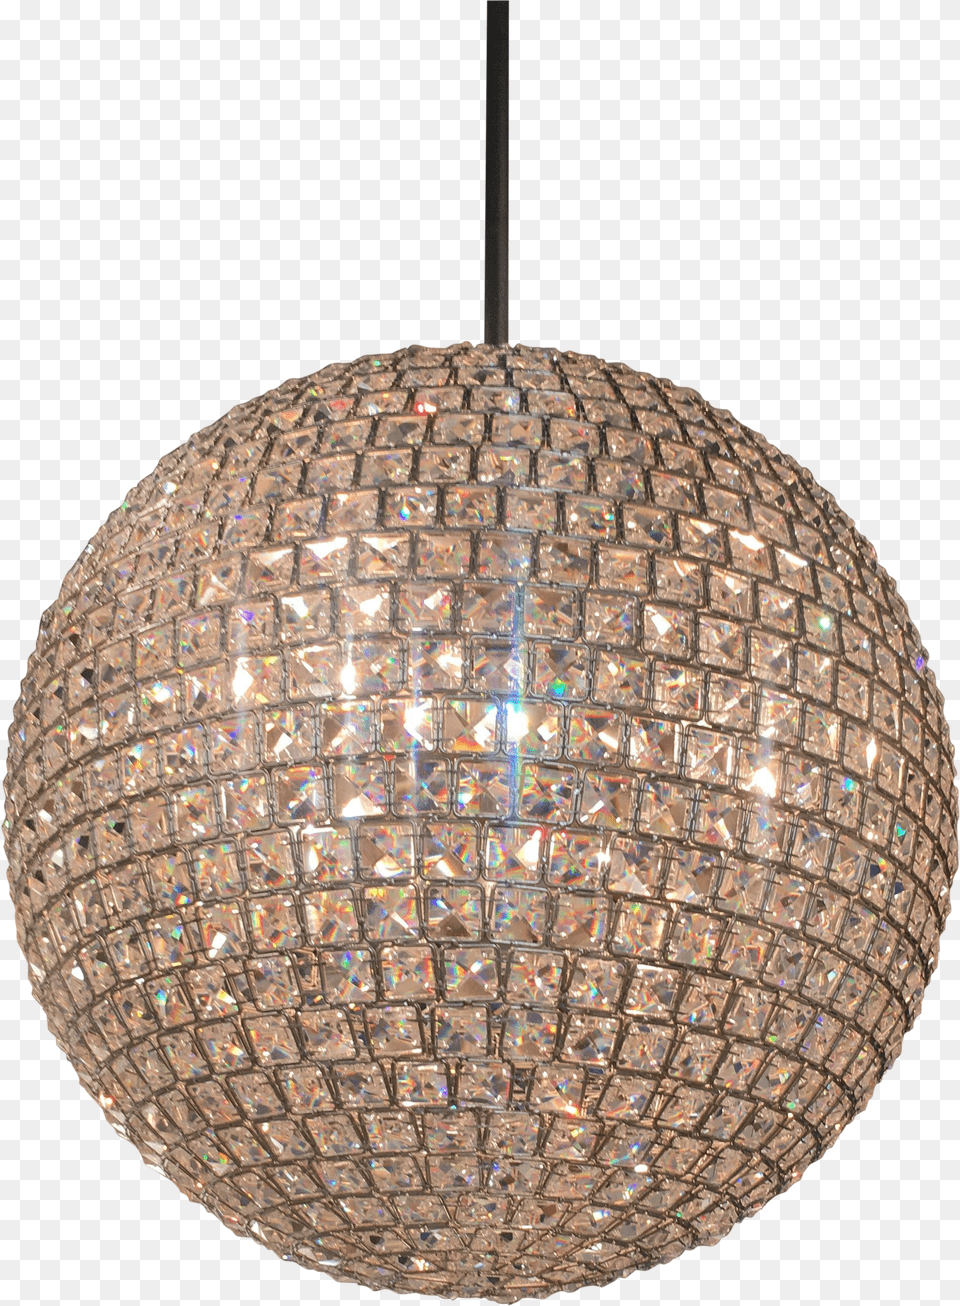 Crystorama Genesis Disco Ball Pendent Light Chandelier Ceiling Fixture Free Png Download